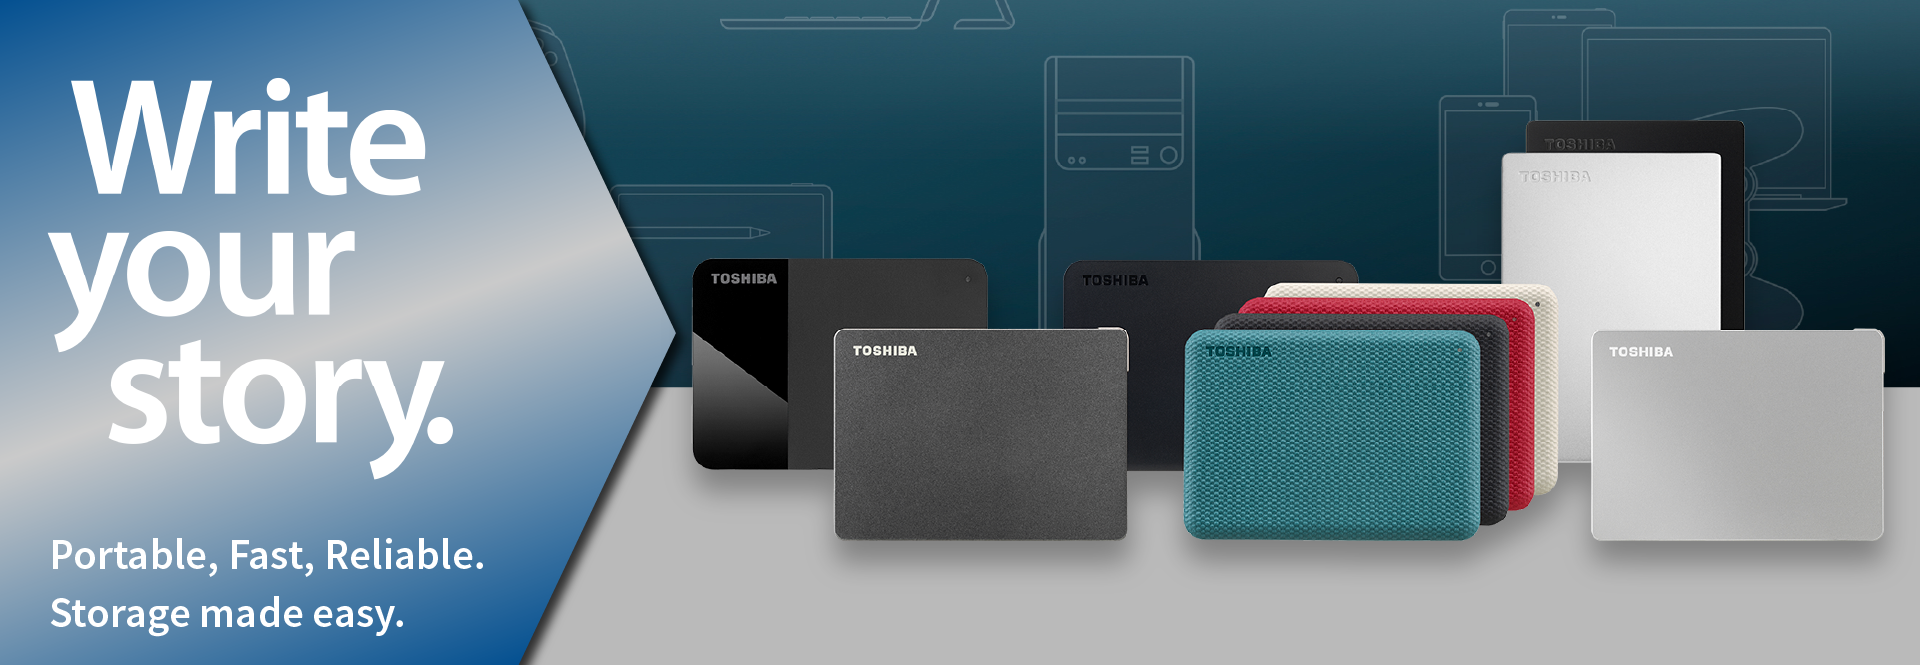 Toshiba External Storage Hard Disk Drives (HDDs) and Solid State Drives (SSDs) for all your media and file storage needs, with USB3.0 and USB-C connectivity | Kaira Global